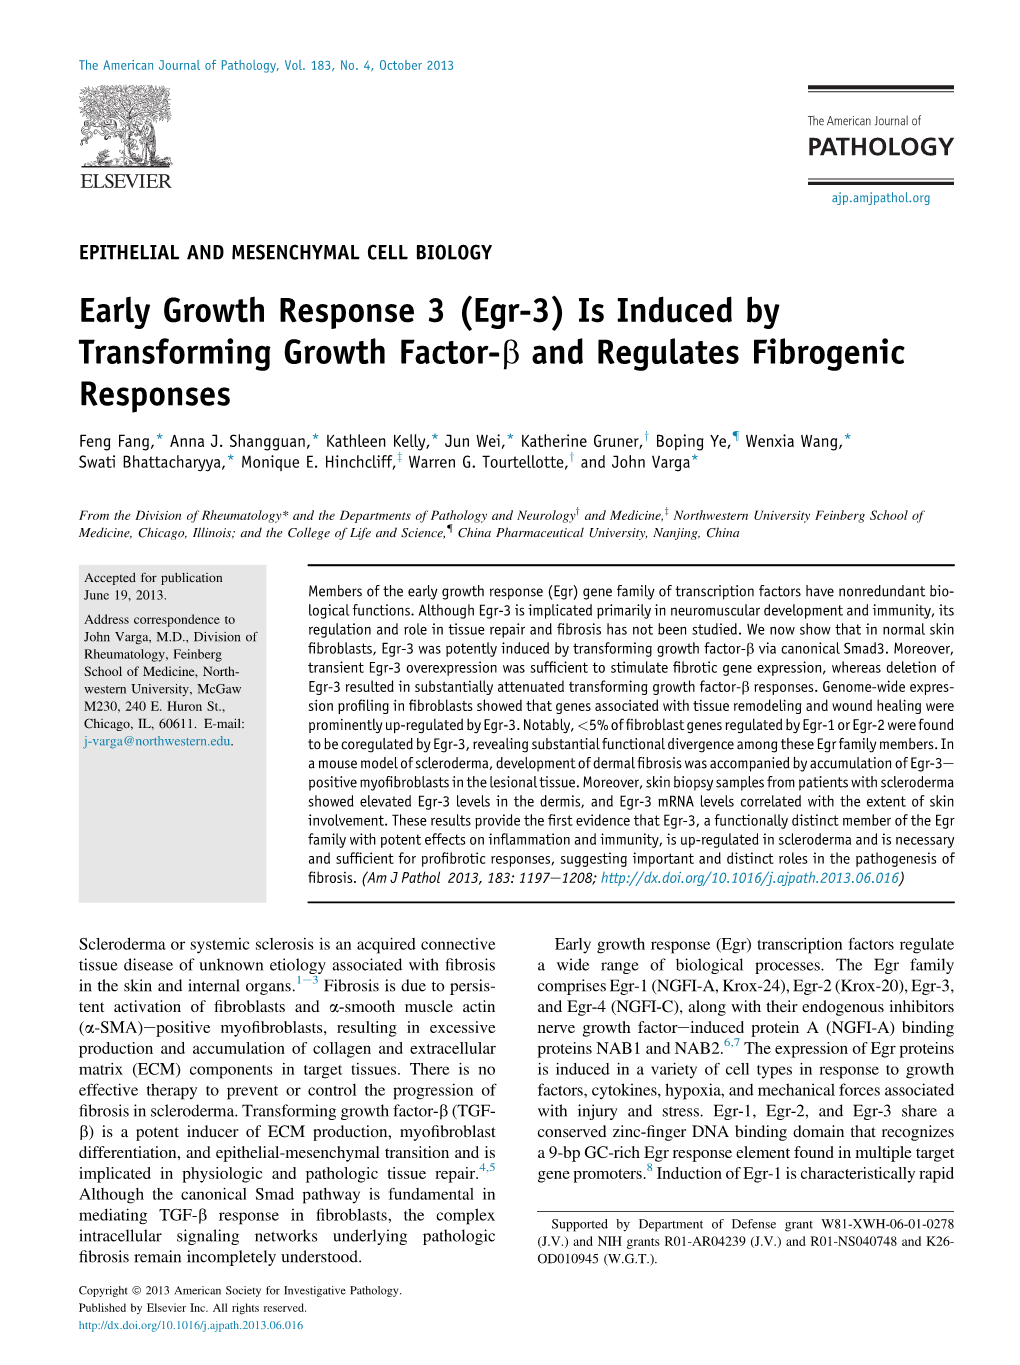 (Egr-3) Is Induced by Transforming Growth Factor-&Beta